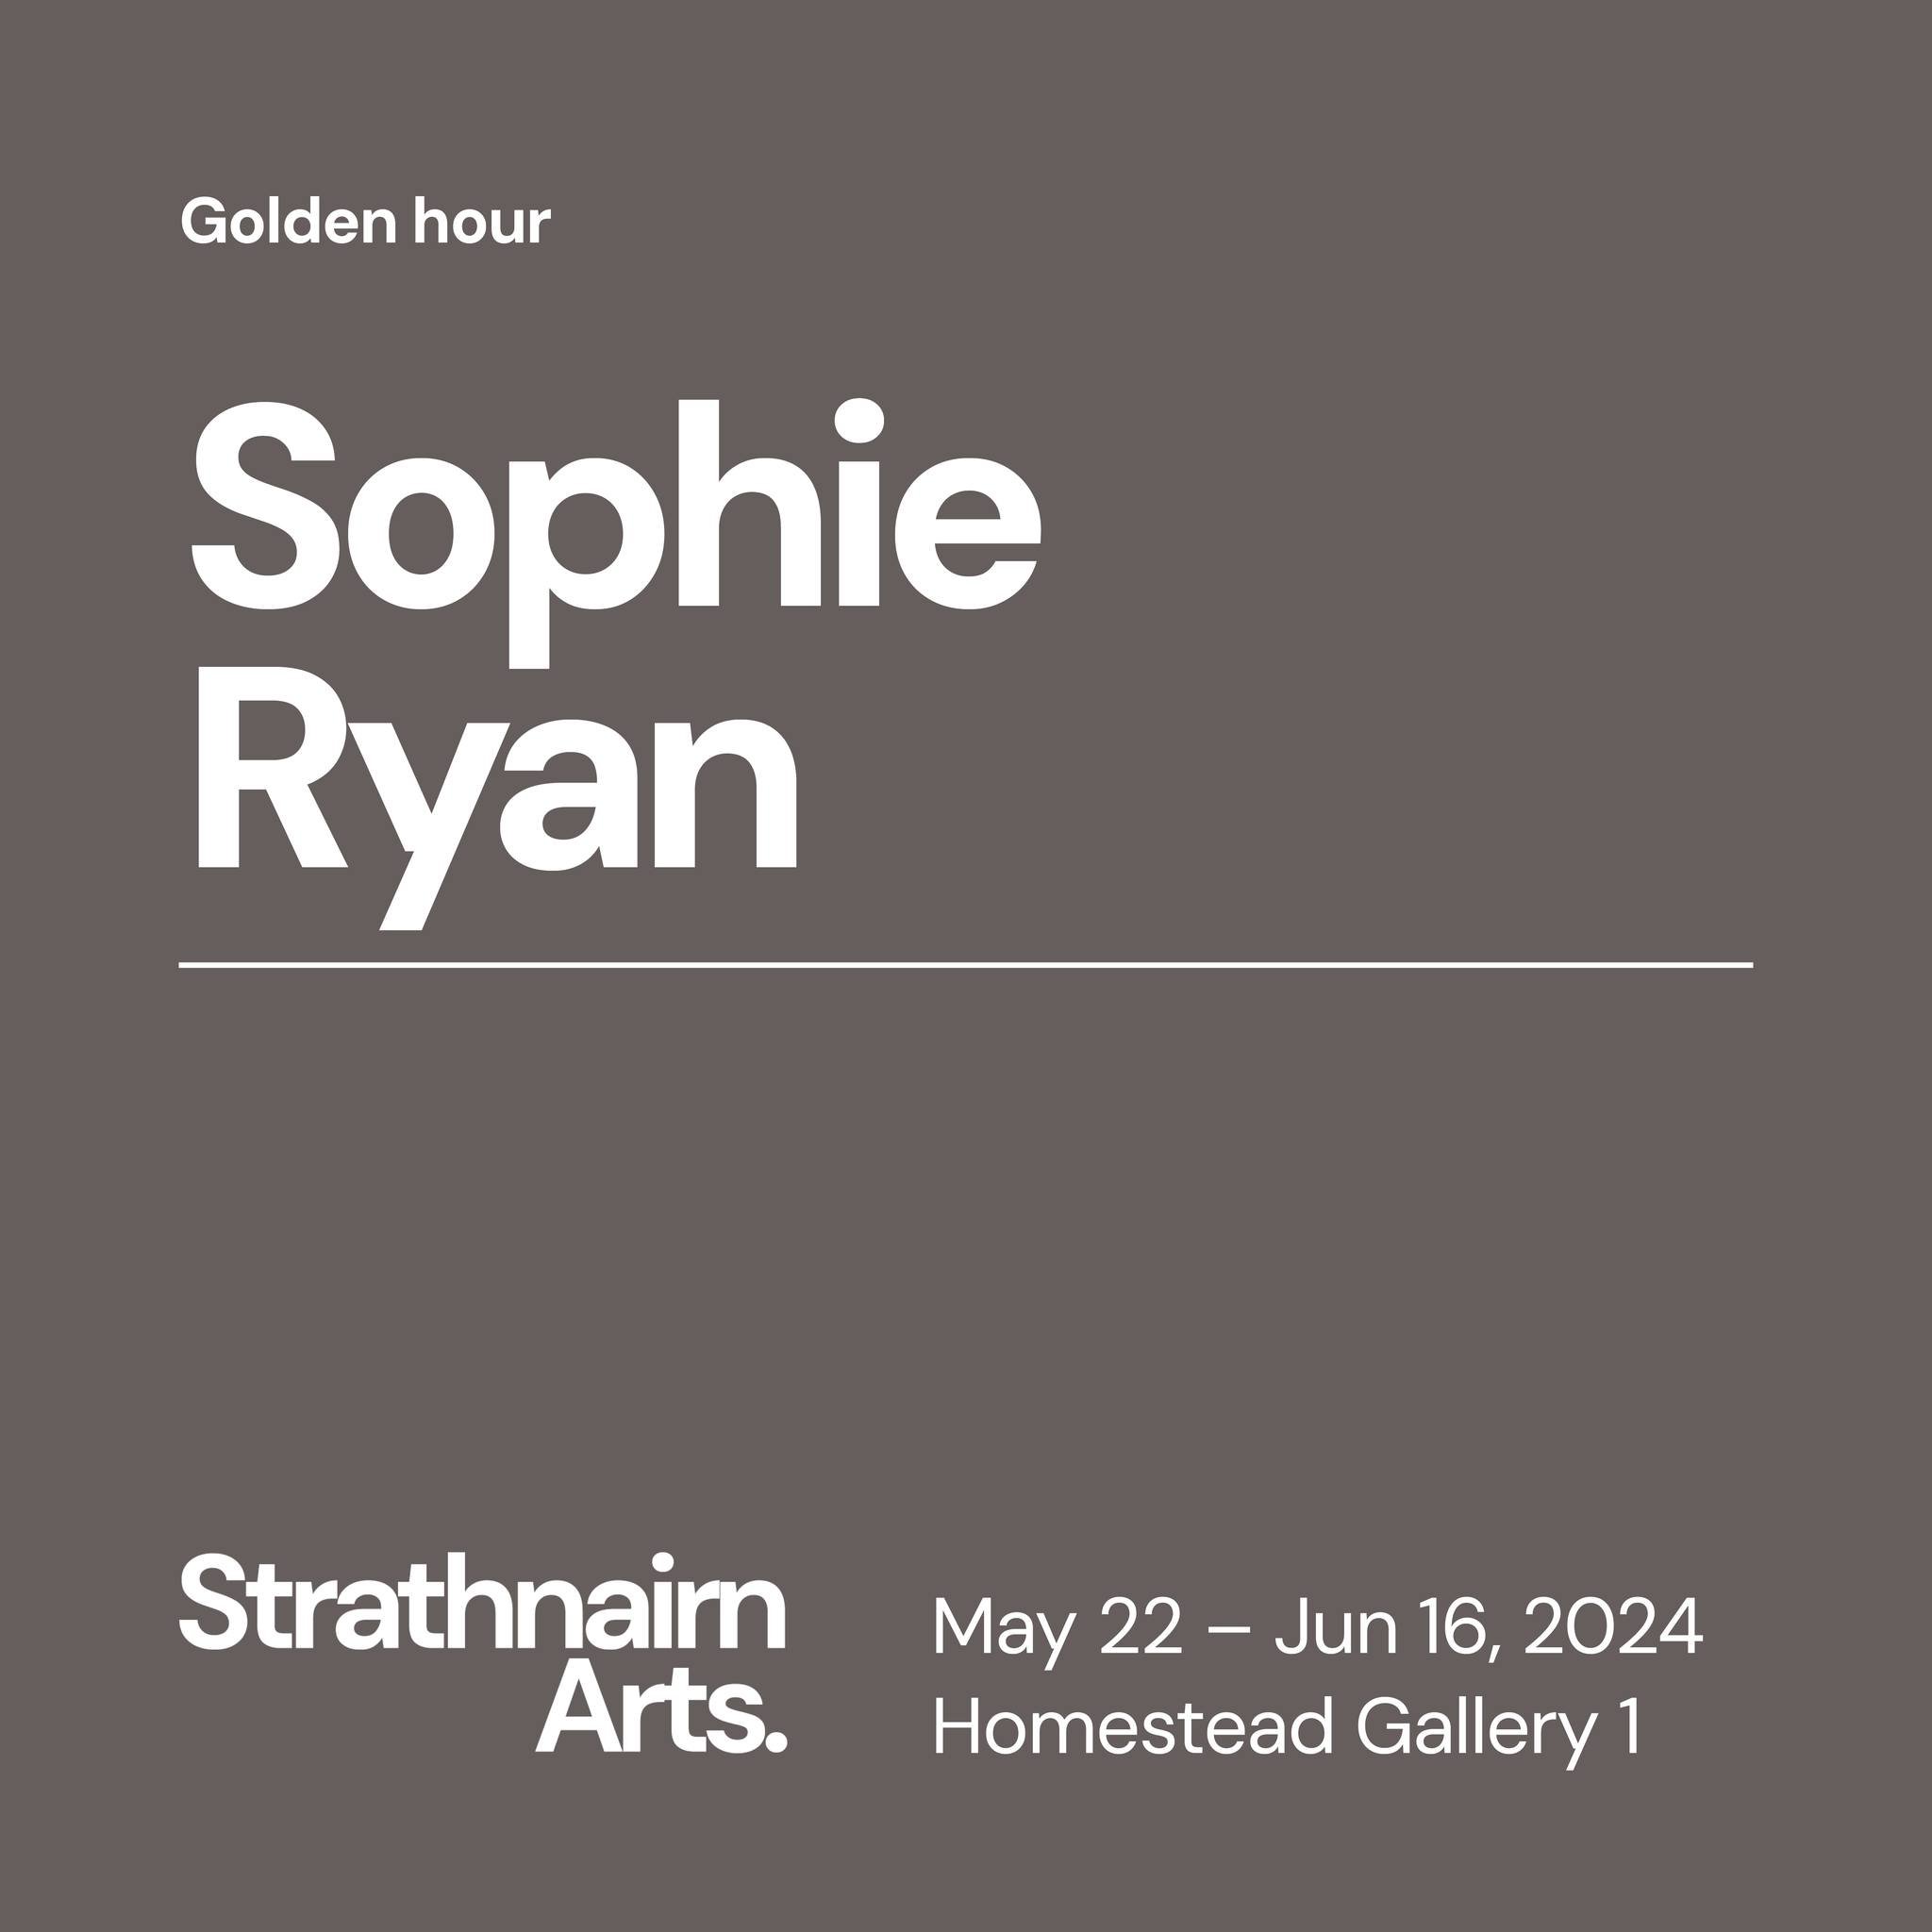 Please join us next Wednesday from 5 to 7 pm for the opening of two fabulous new exhibitions!

✨ Homestead Gallery 1
Sophie Ryan
Golden Hour
Emerging artist Sophie Ryan explores the ephemerality of light and dark through landscapes that exist in a sp